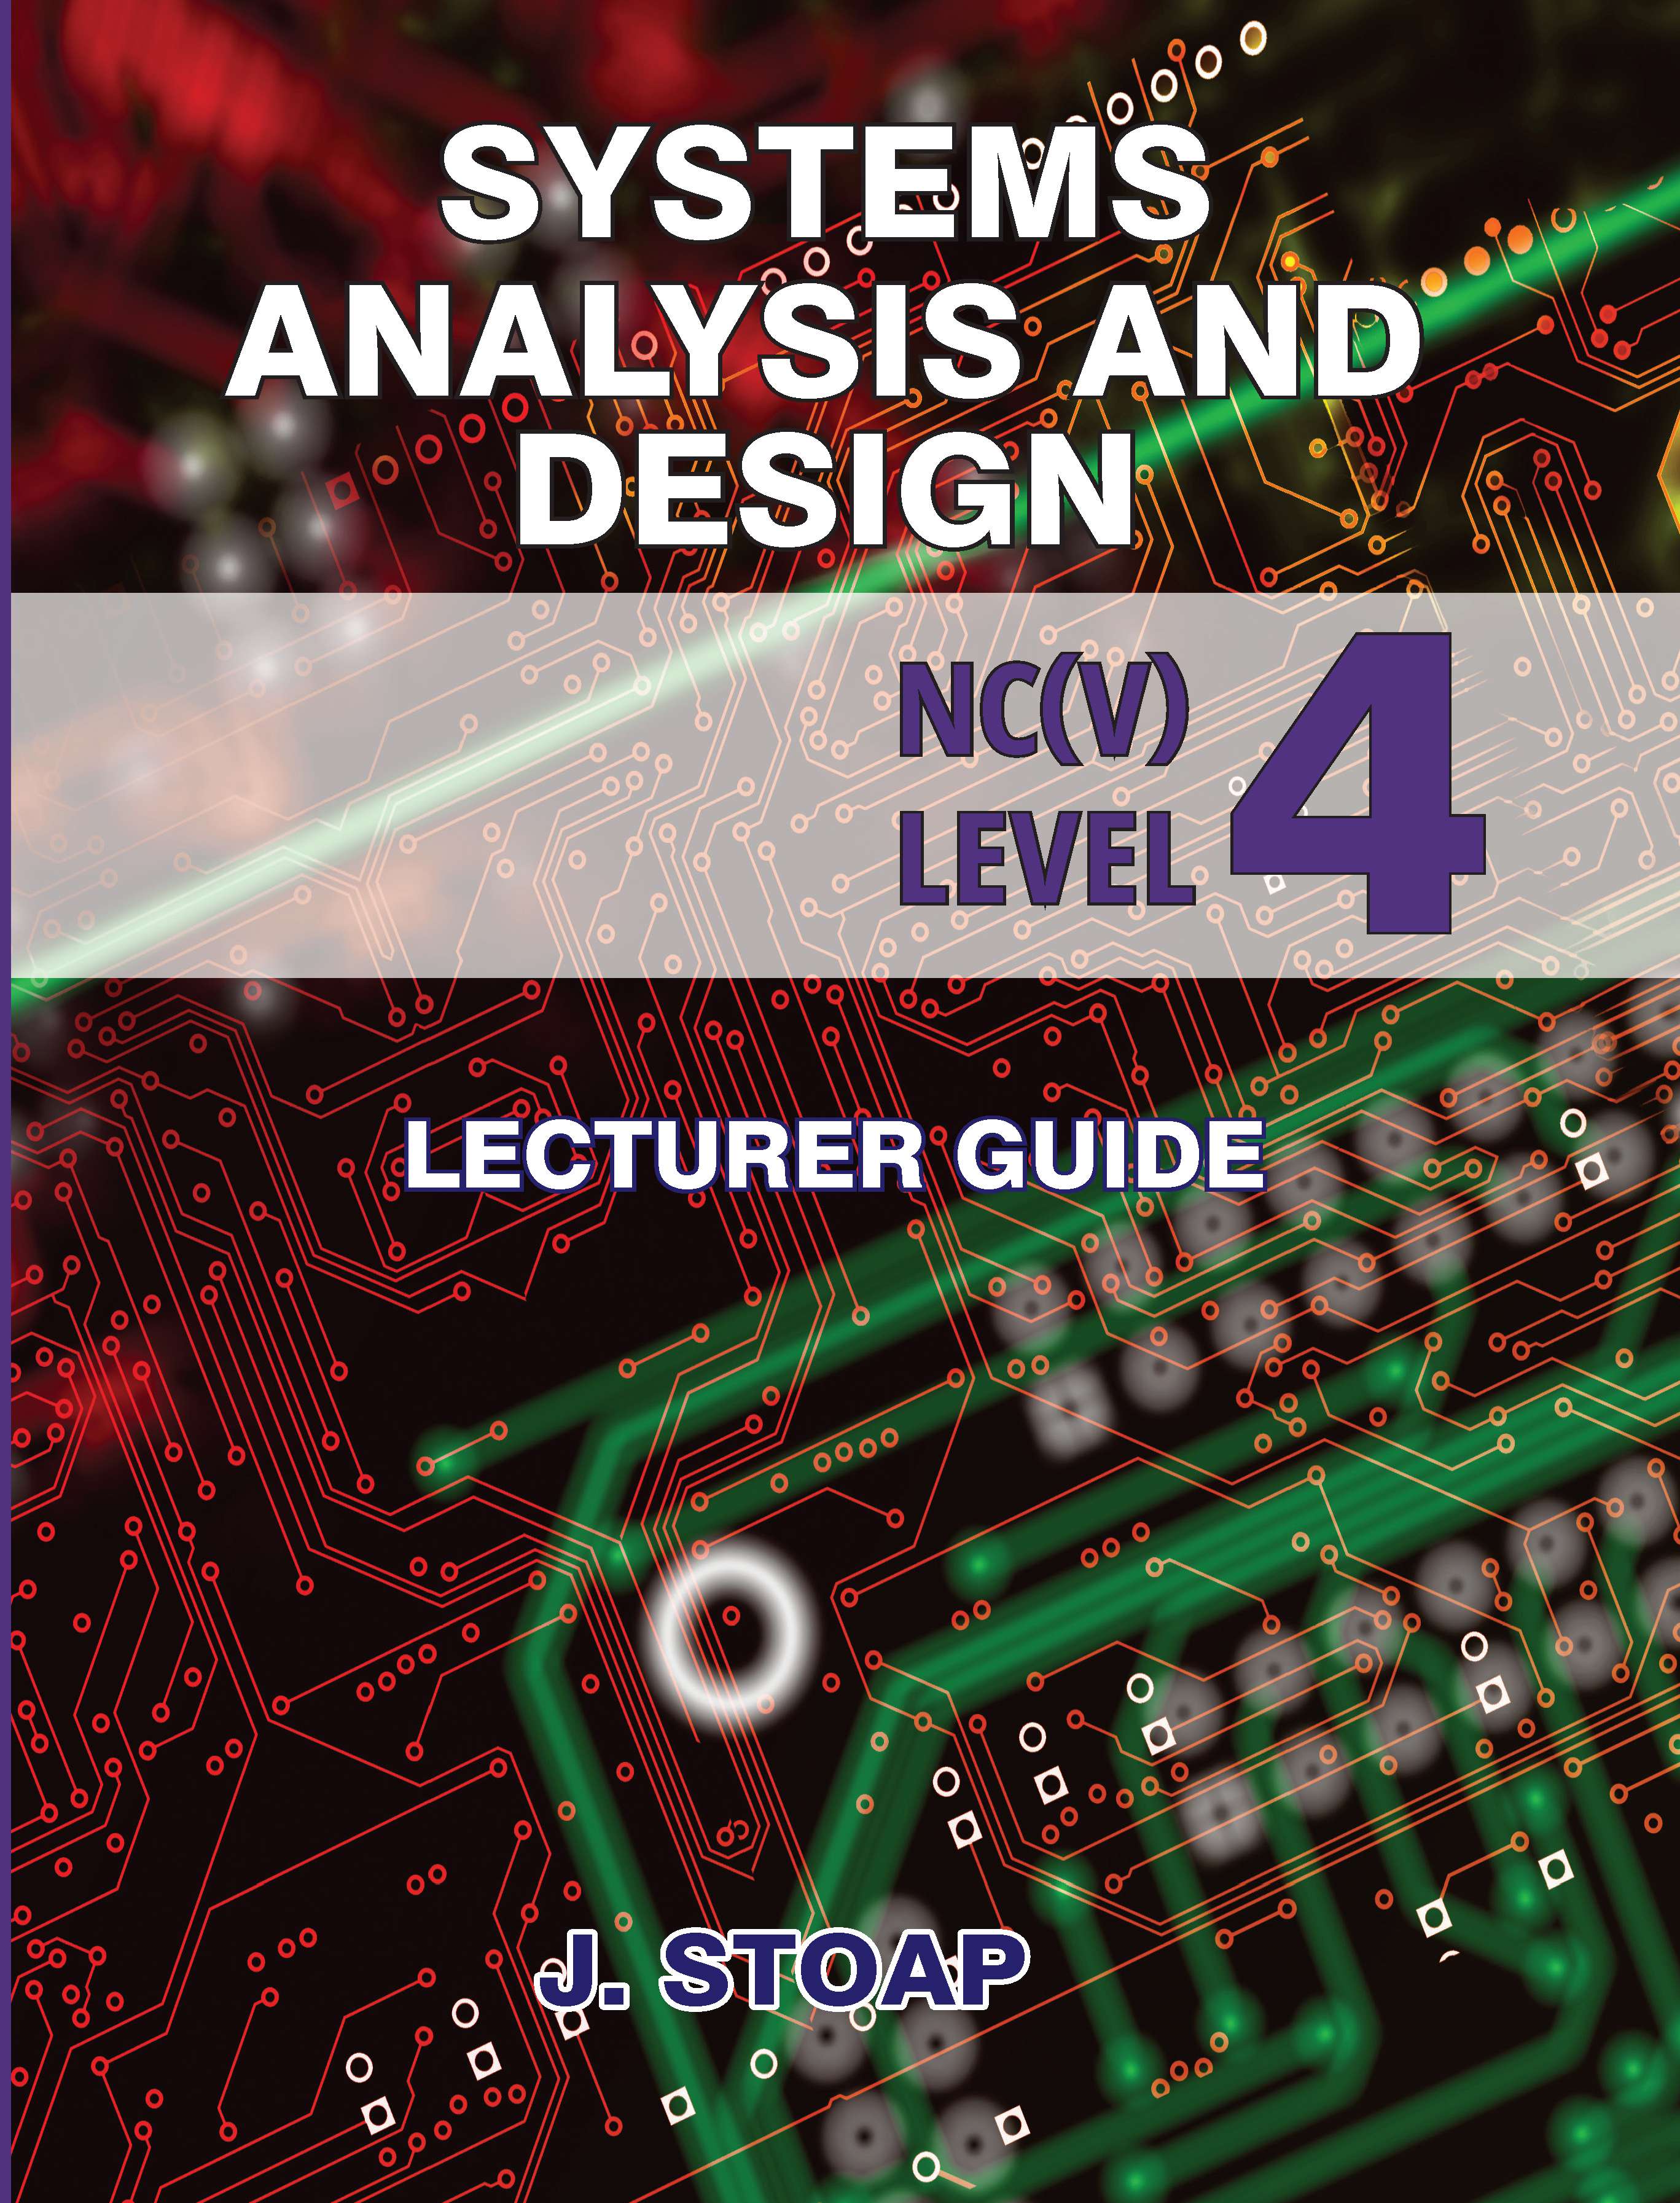 SHUTERS SYSTEMS ANALYSIS AND DESIGN NC(V) LEVEL 4 LECTURER GUIDE Cover